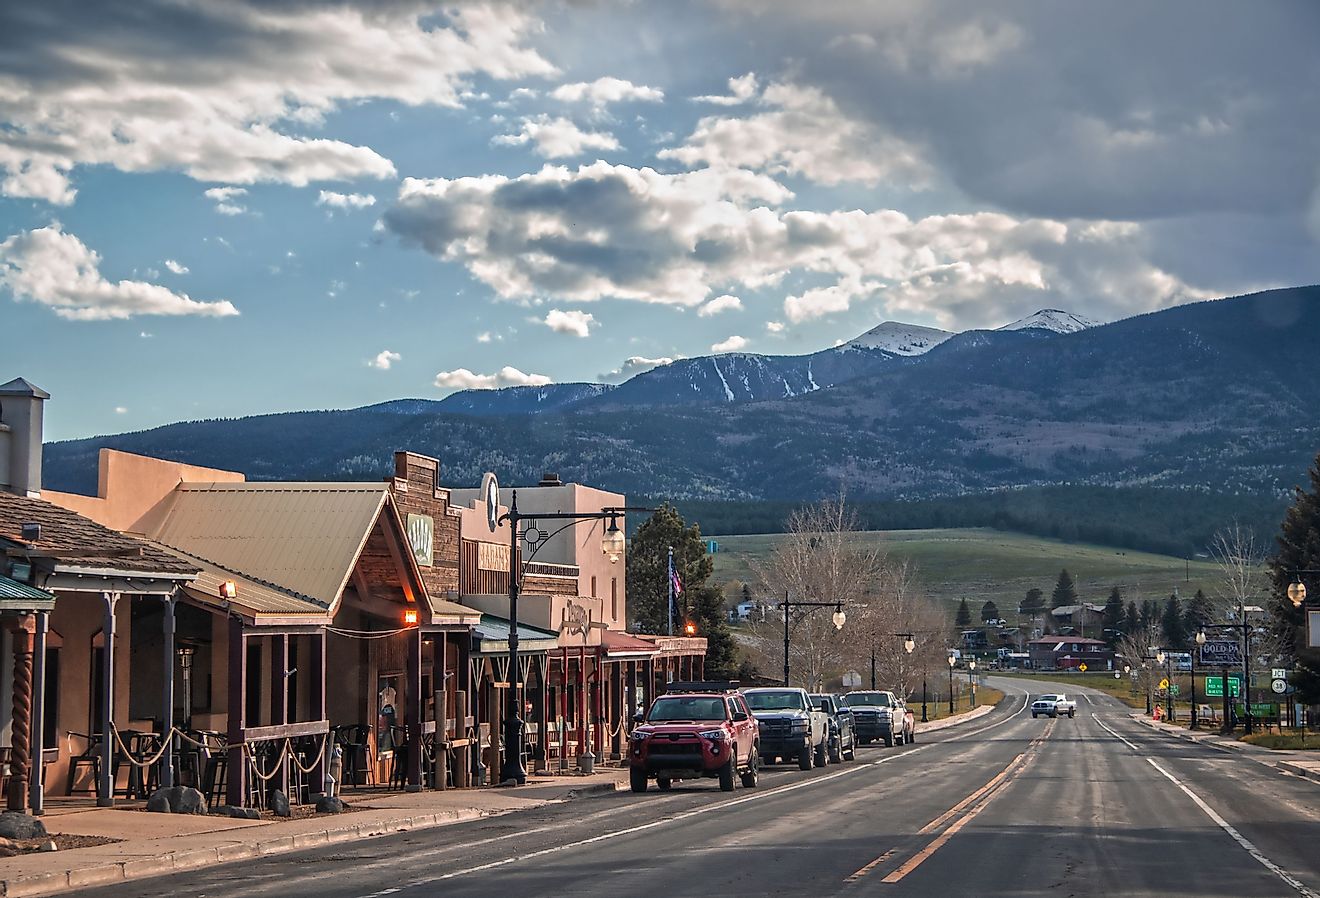 Downtown Red River, New Mexico. Image credit Red River New Mexico via Shutterstock